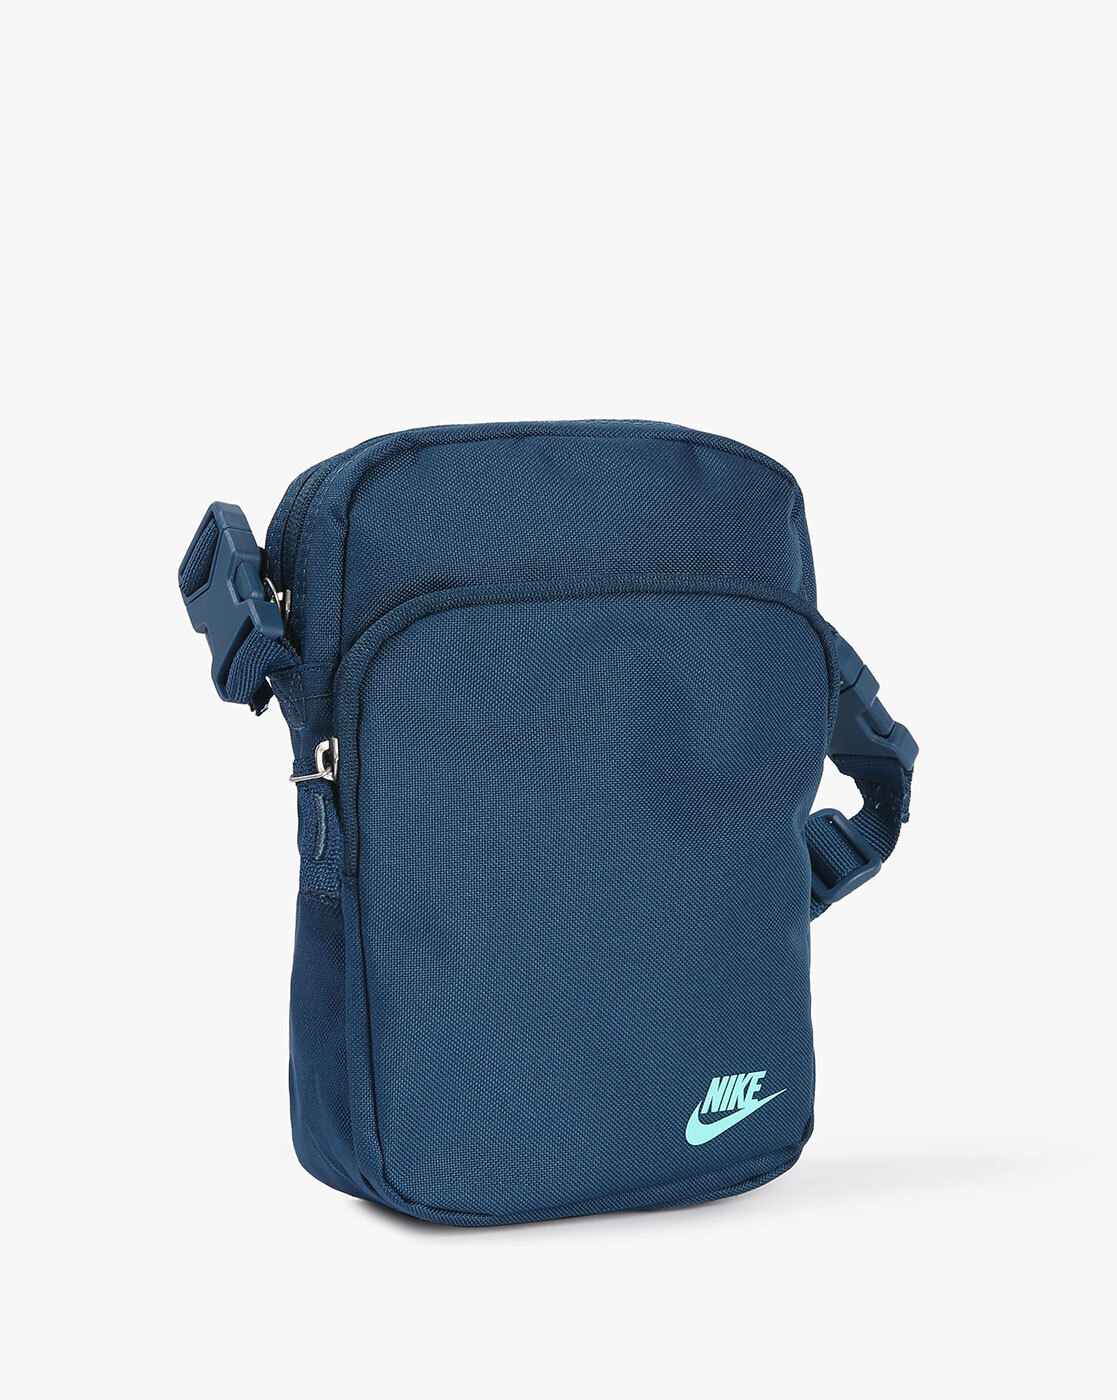 Buy Blue Fashion Bags for Men by NIKE Online